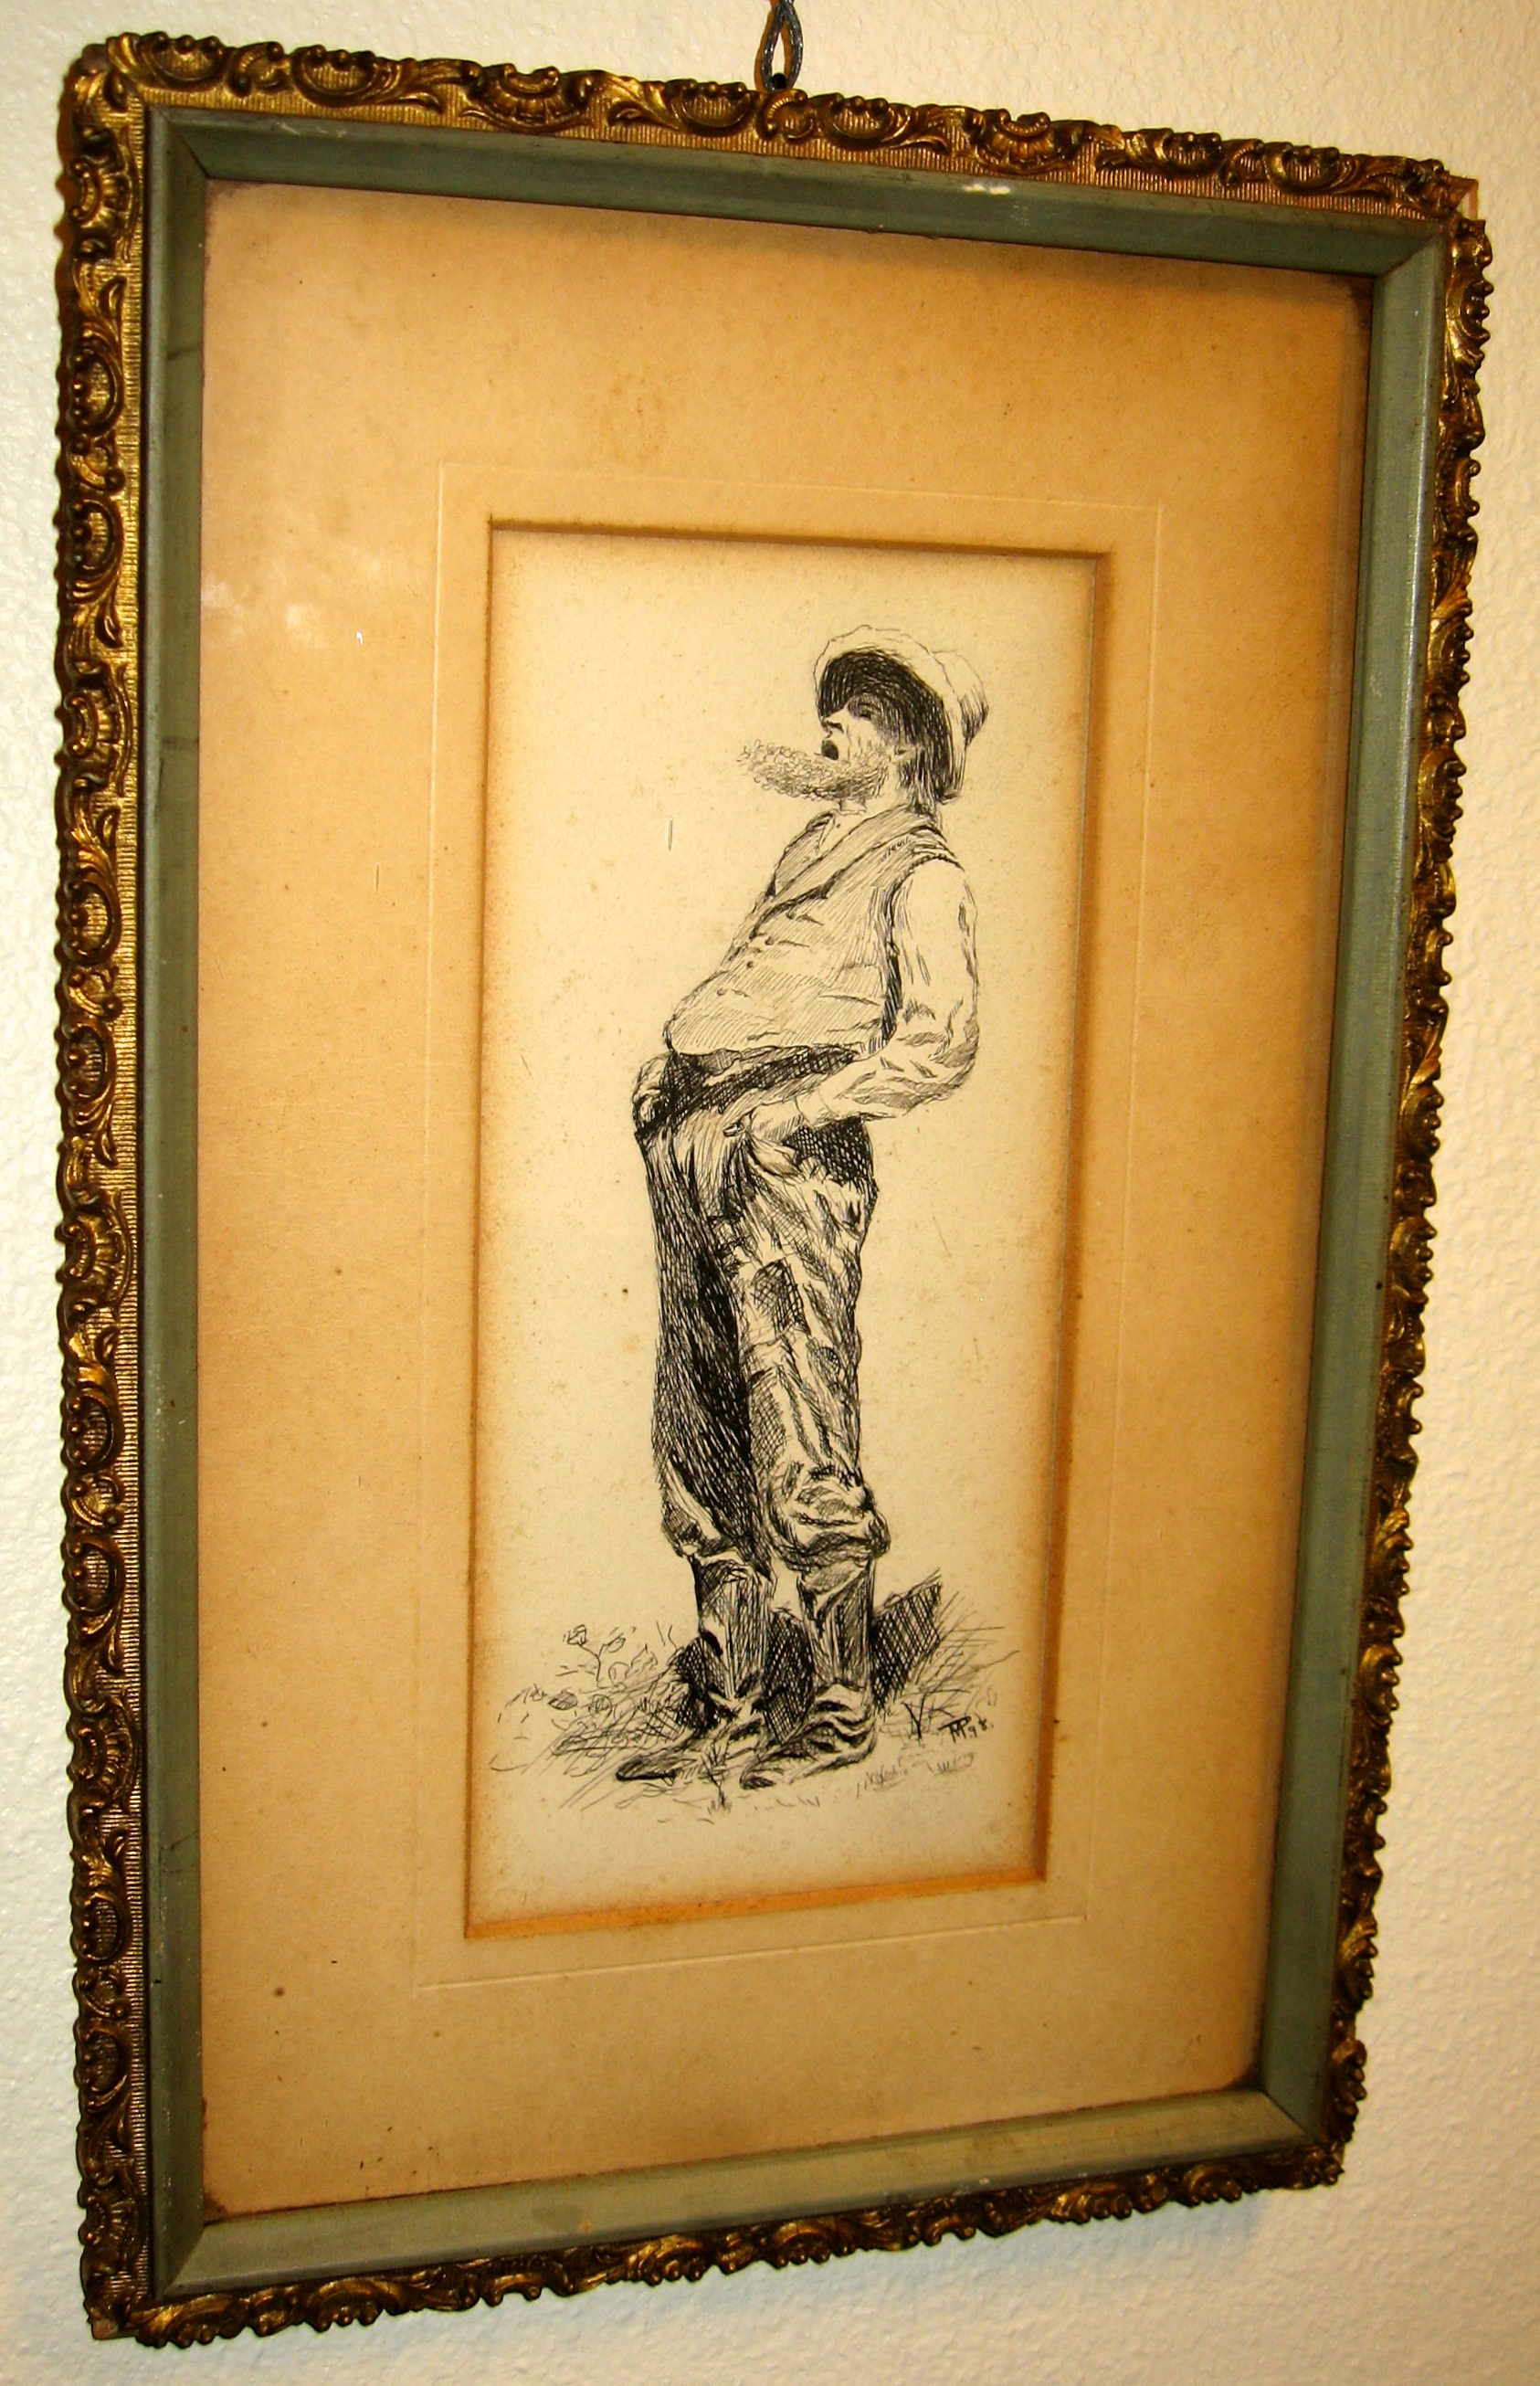 Print Signed MP and dated 1892